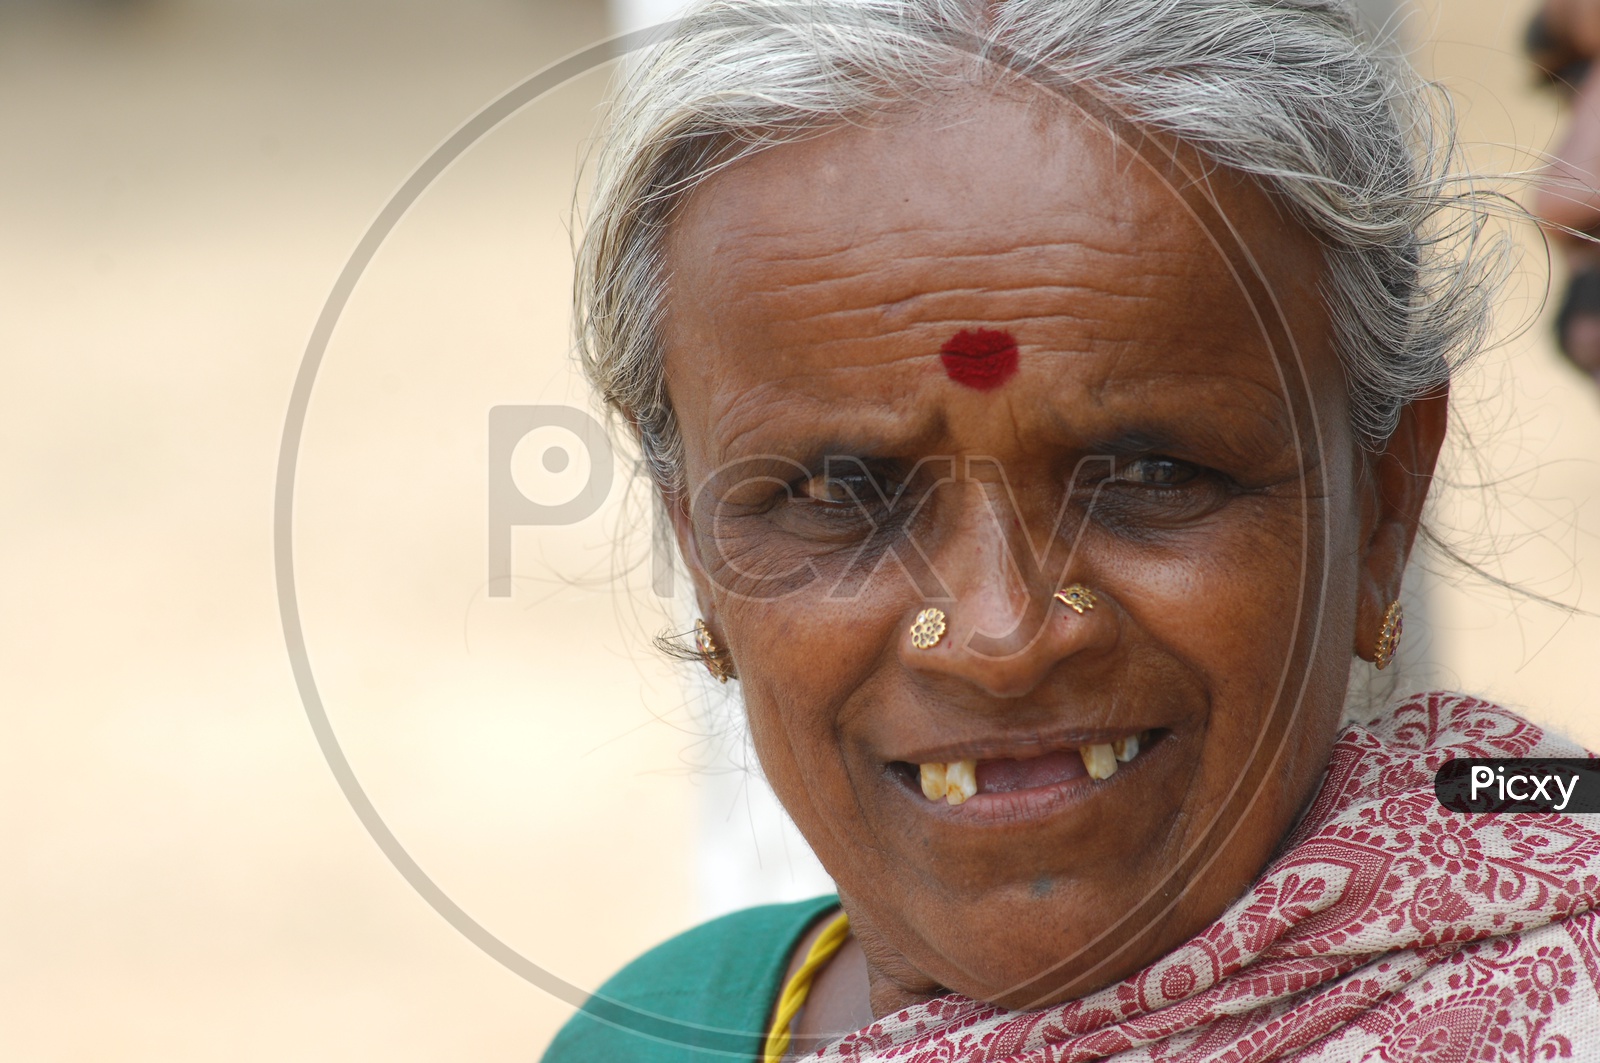 Photograph of an Old women / People face